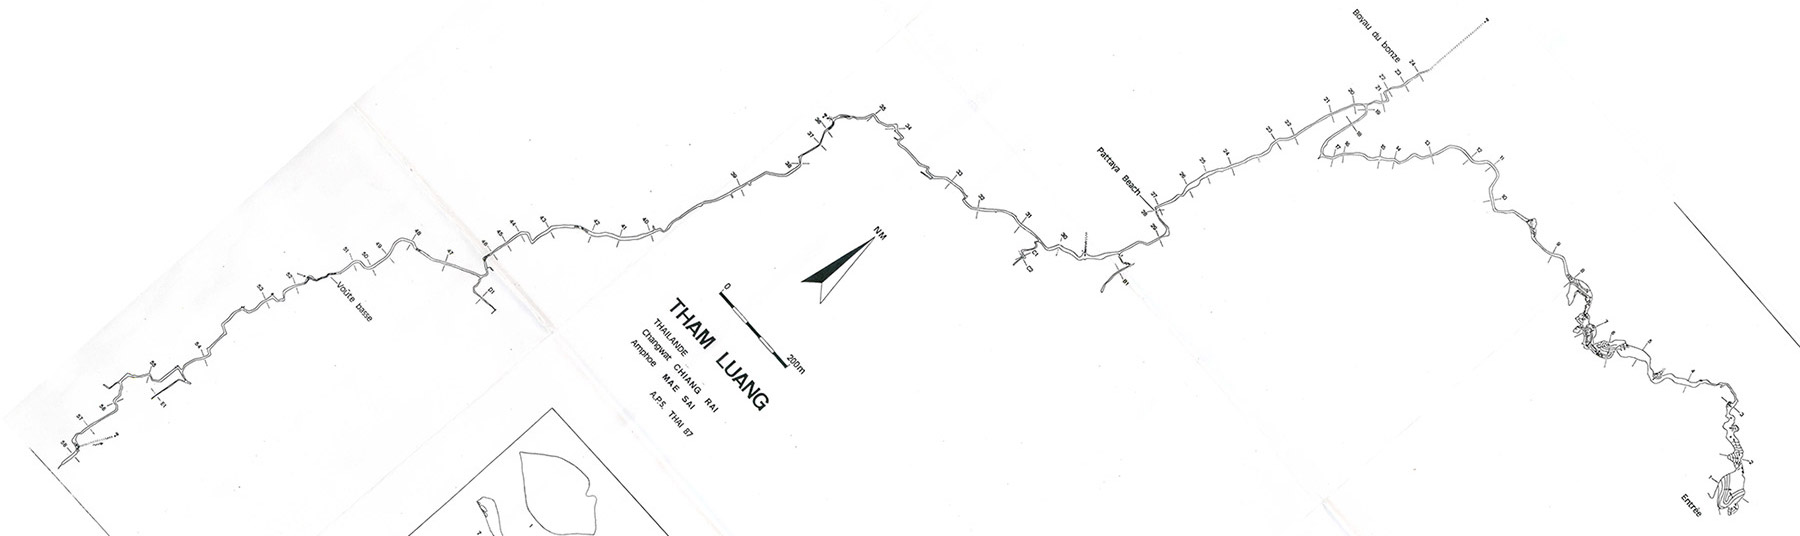 A portion of the original 1987 map produced by the French team.